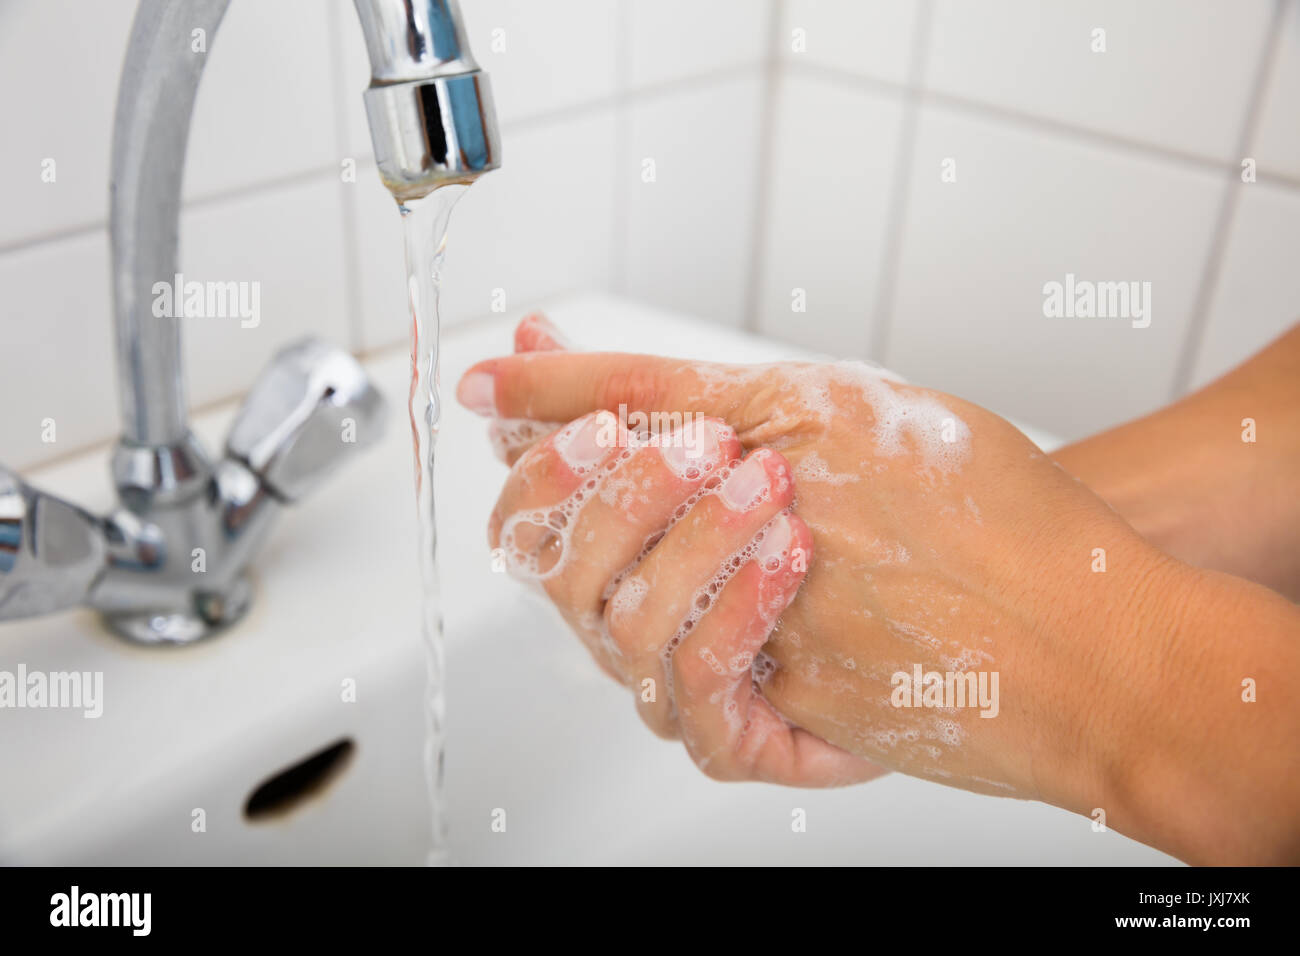 Close-up Of Woman Applying Soap While Washing Hands In Basin With Open Tap Stock Photo